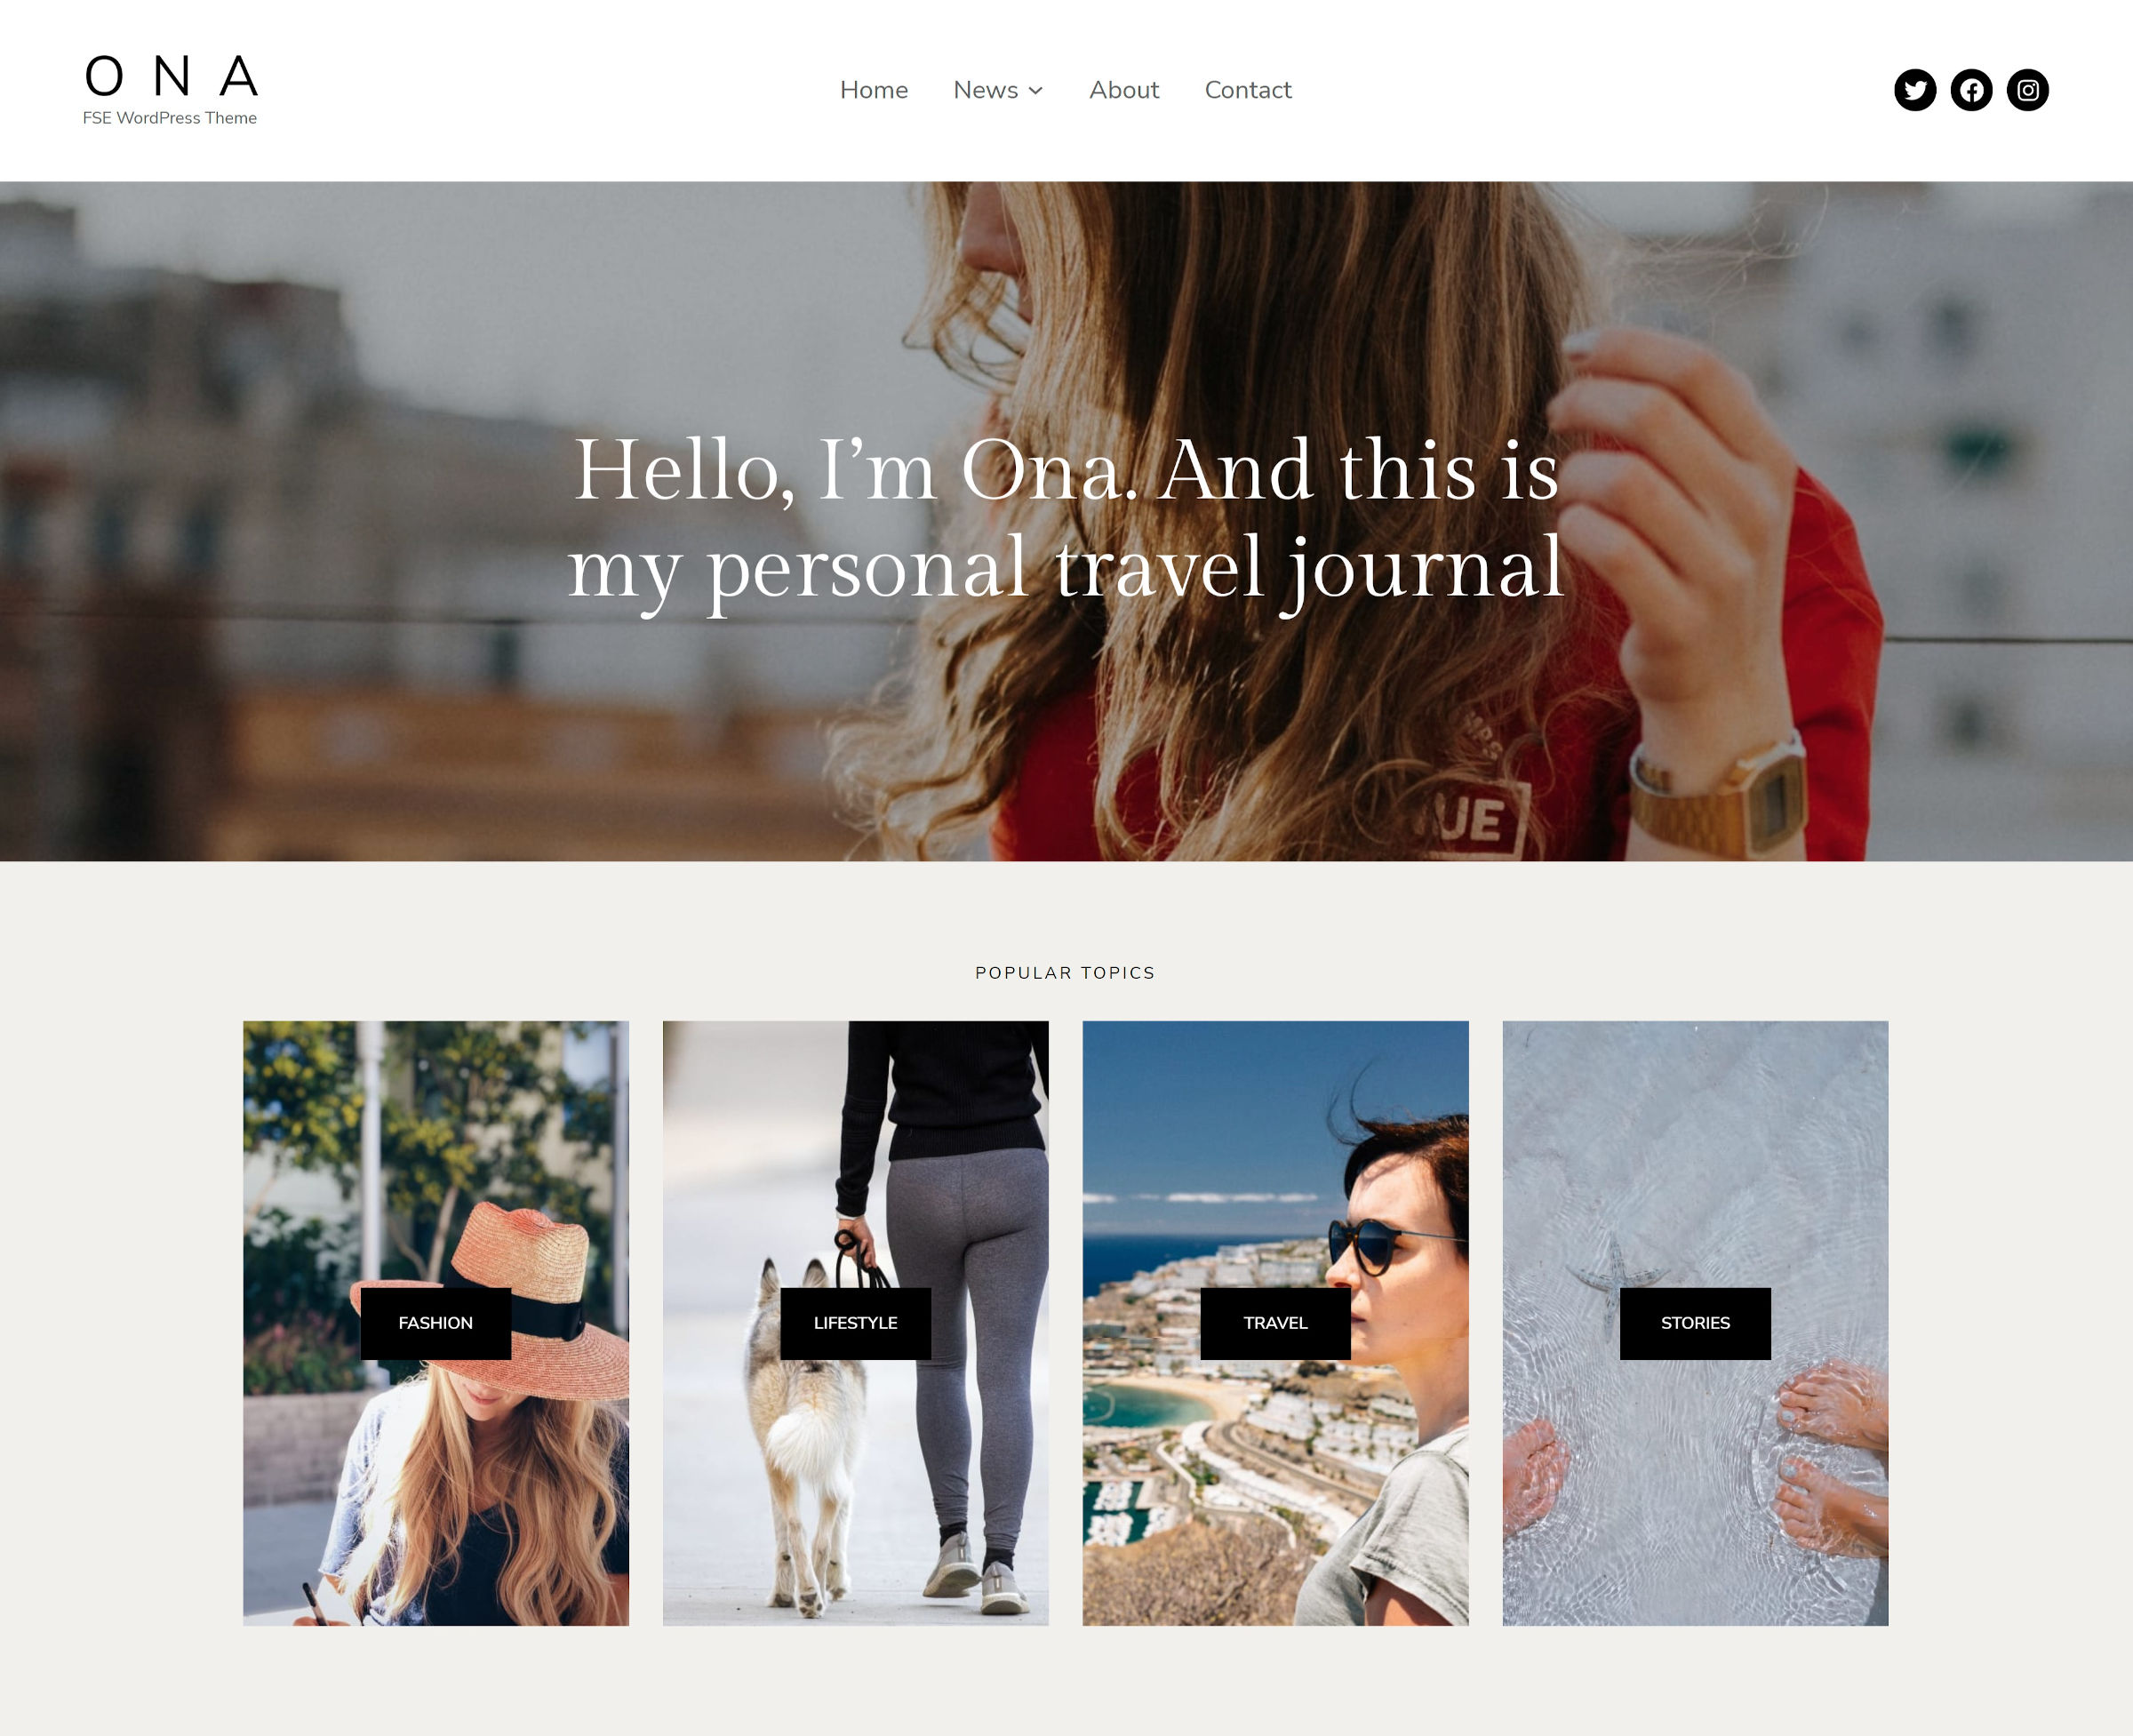 Homepage design of the Ona WordPress theme, featuring a large hero area that stretches across the top of the page, followed by four columns of boxes with background images.